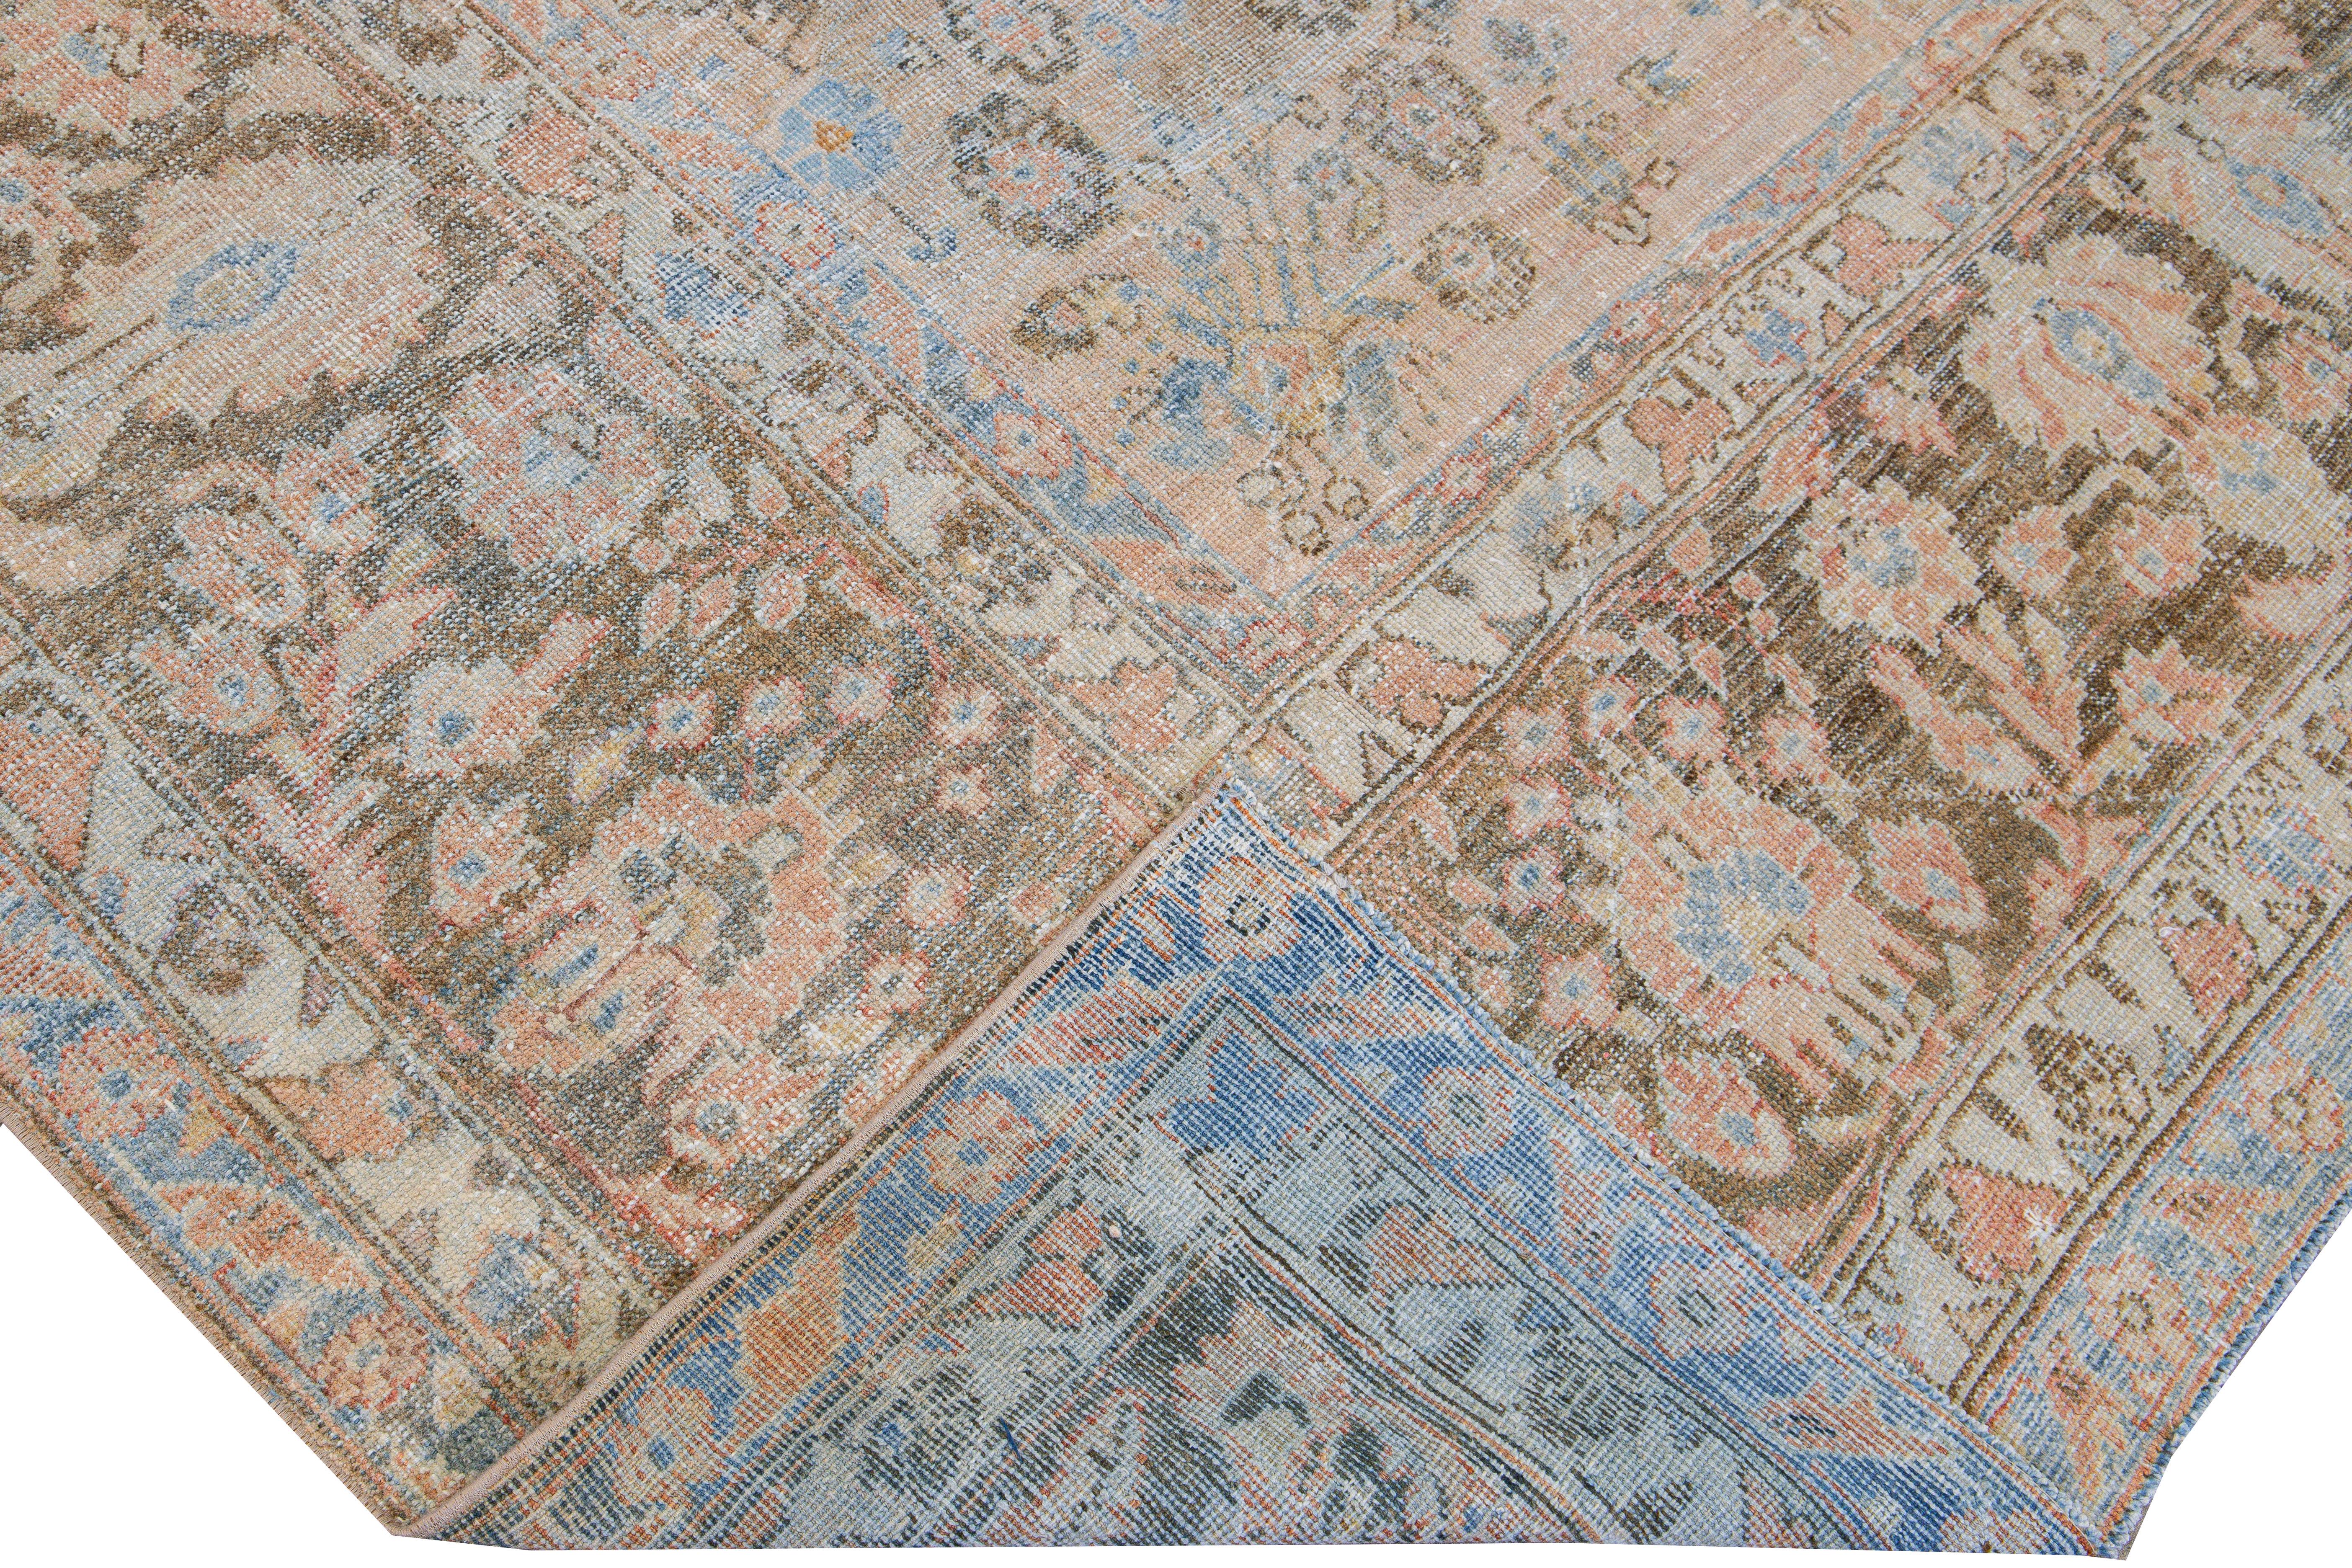 Beautiful antique Malayer hand-knotted wool rug with a blue and peach field. This Malayer piece has a brown frame and red accents in a gorgeous all-over floral pattern design.

This rug measures: 7'9